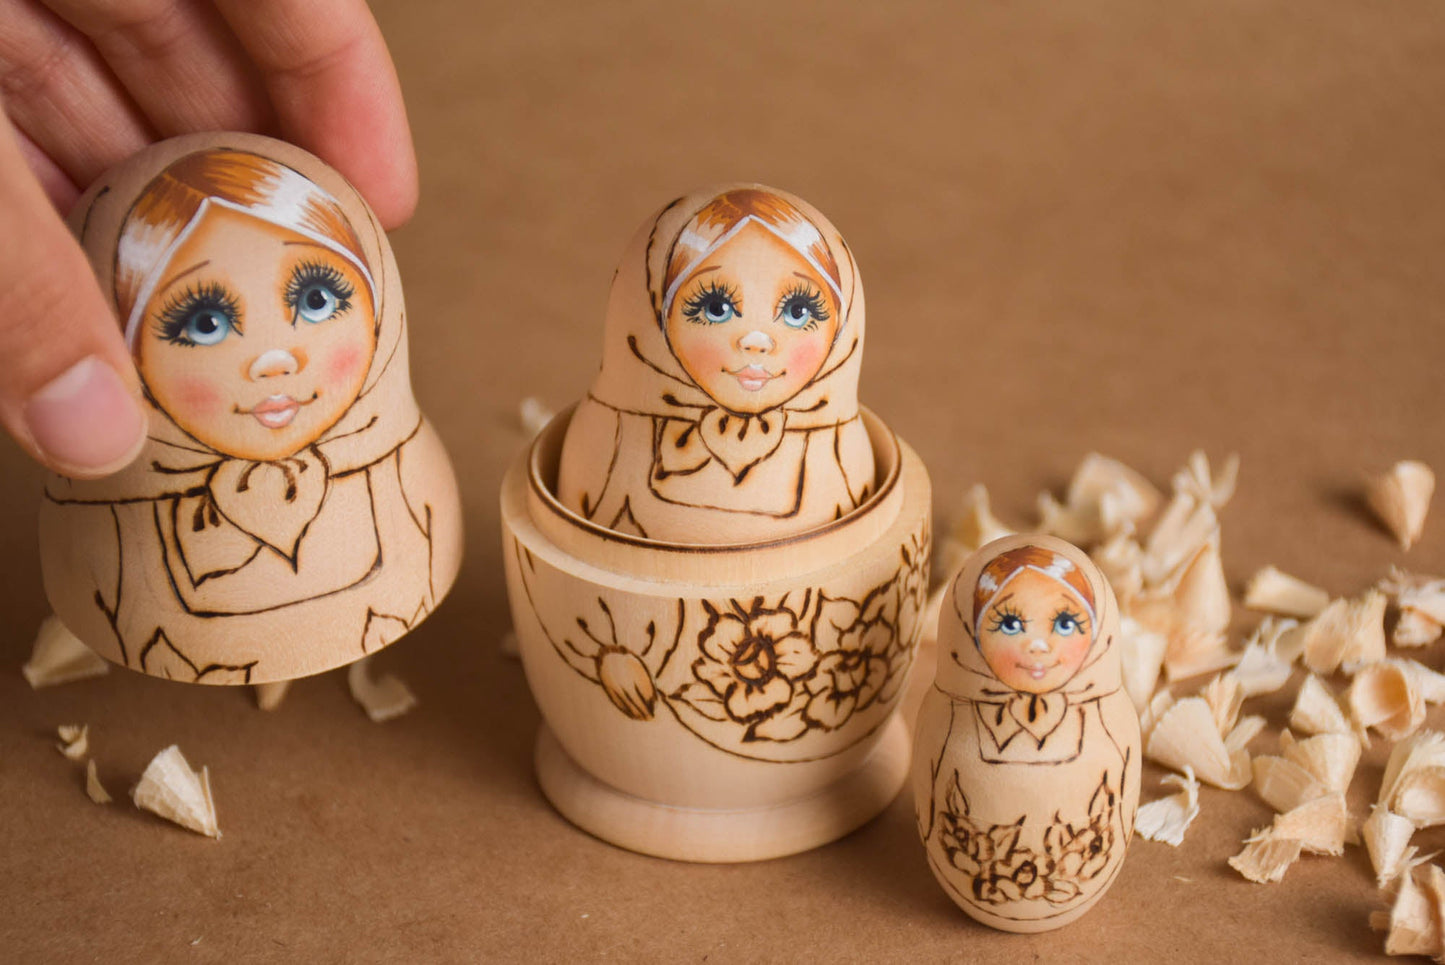 Russian Stacking Dolls